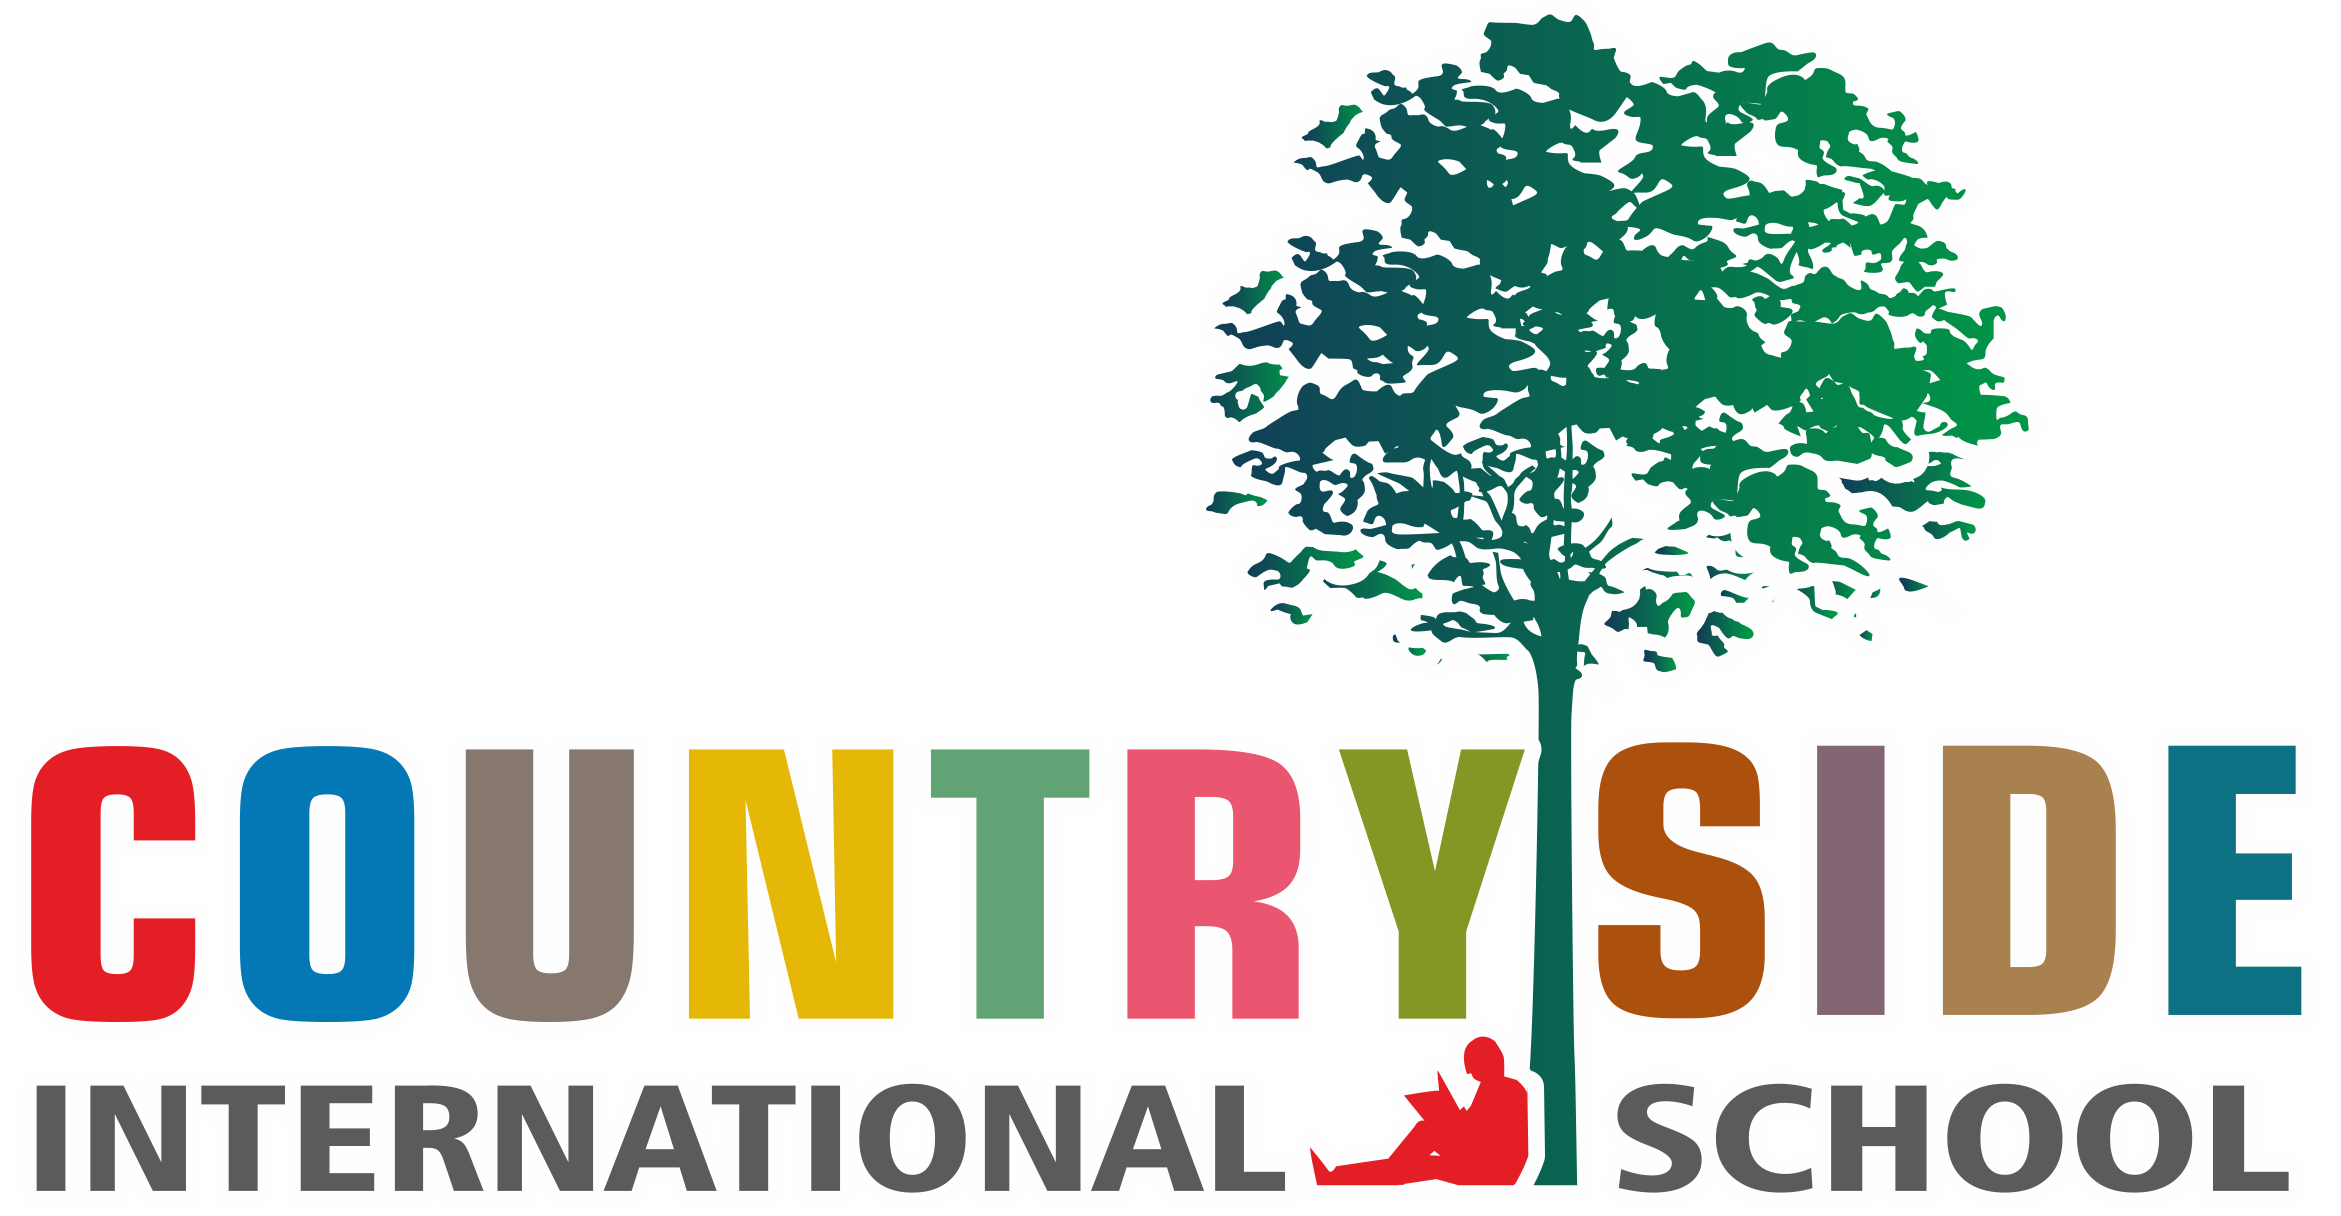 Web designer for Country Side International School in Surat, India